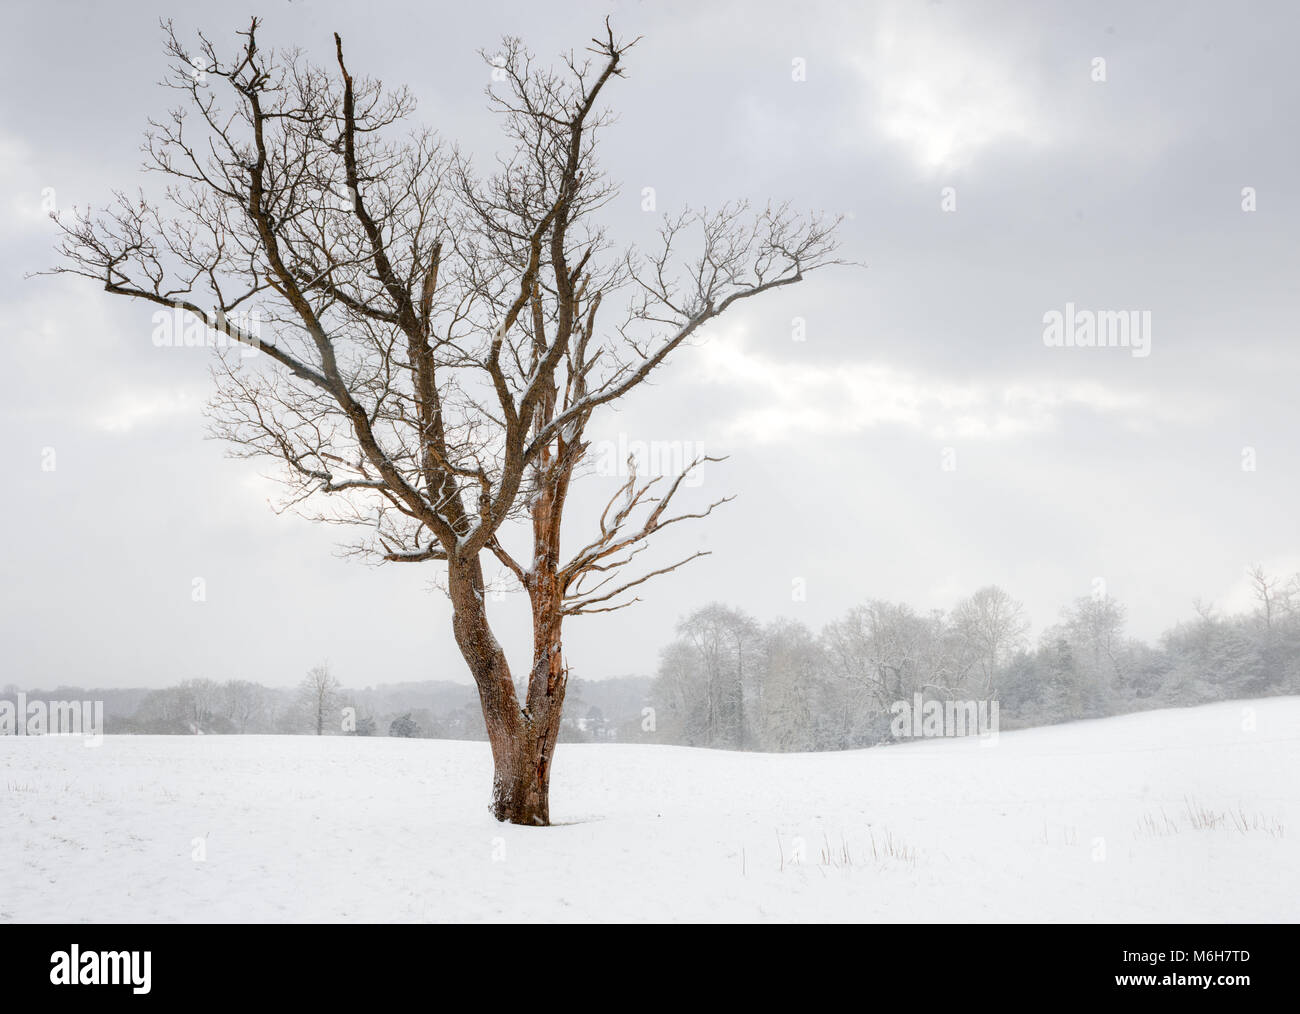 Bare tree in a field during heavy snow Stock Photo